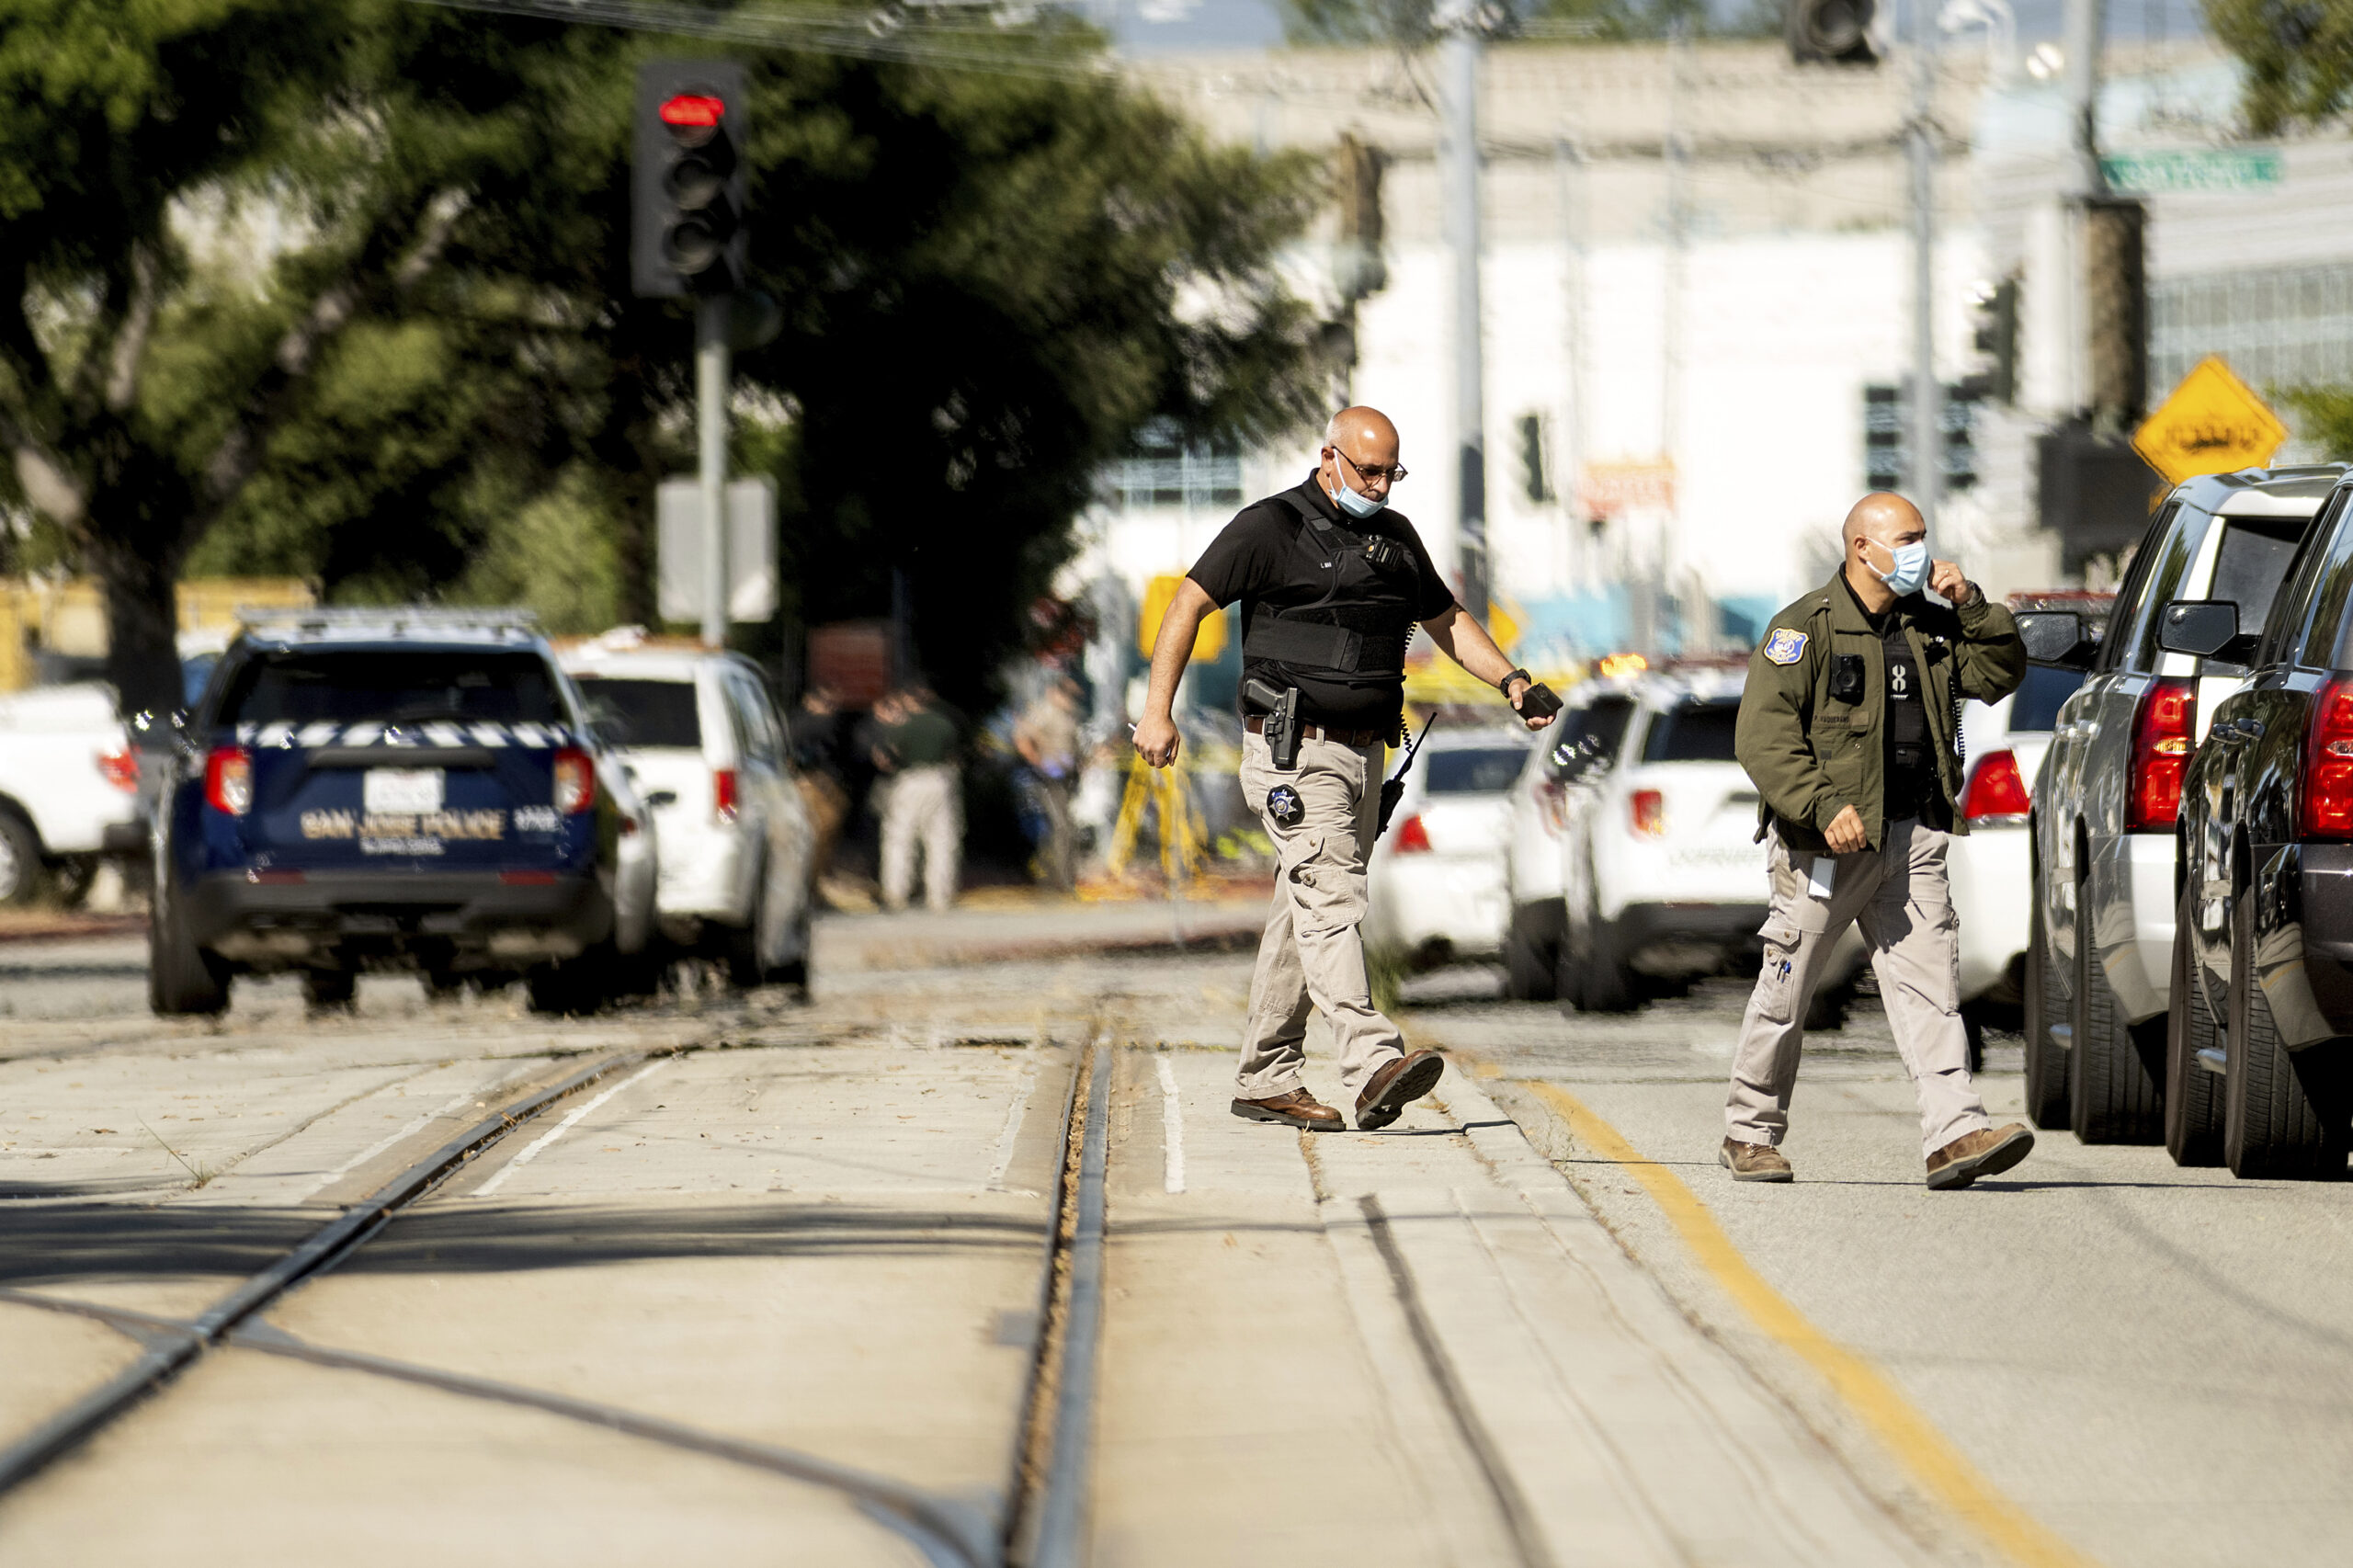 Law enforcement officers respond to the scene of a shooting at a Santa Clara Valley Transportation Authority (VTA) facility on Wednesday, May 26, 2021, in San Jose, Calif. Santa Clara County sheriff's spokesman said the railyard shooting left multiple people, including the shooter, dead. (AP Photo/Noah Berger)